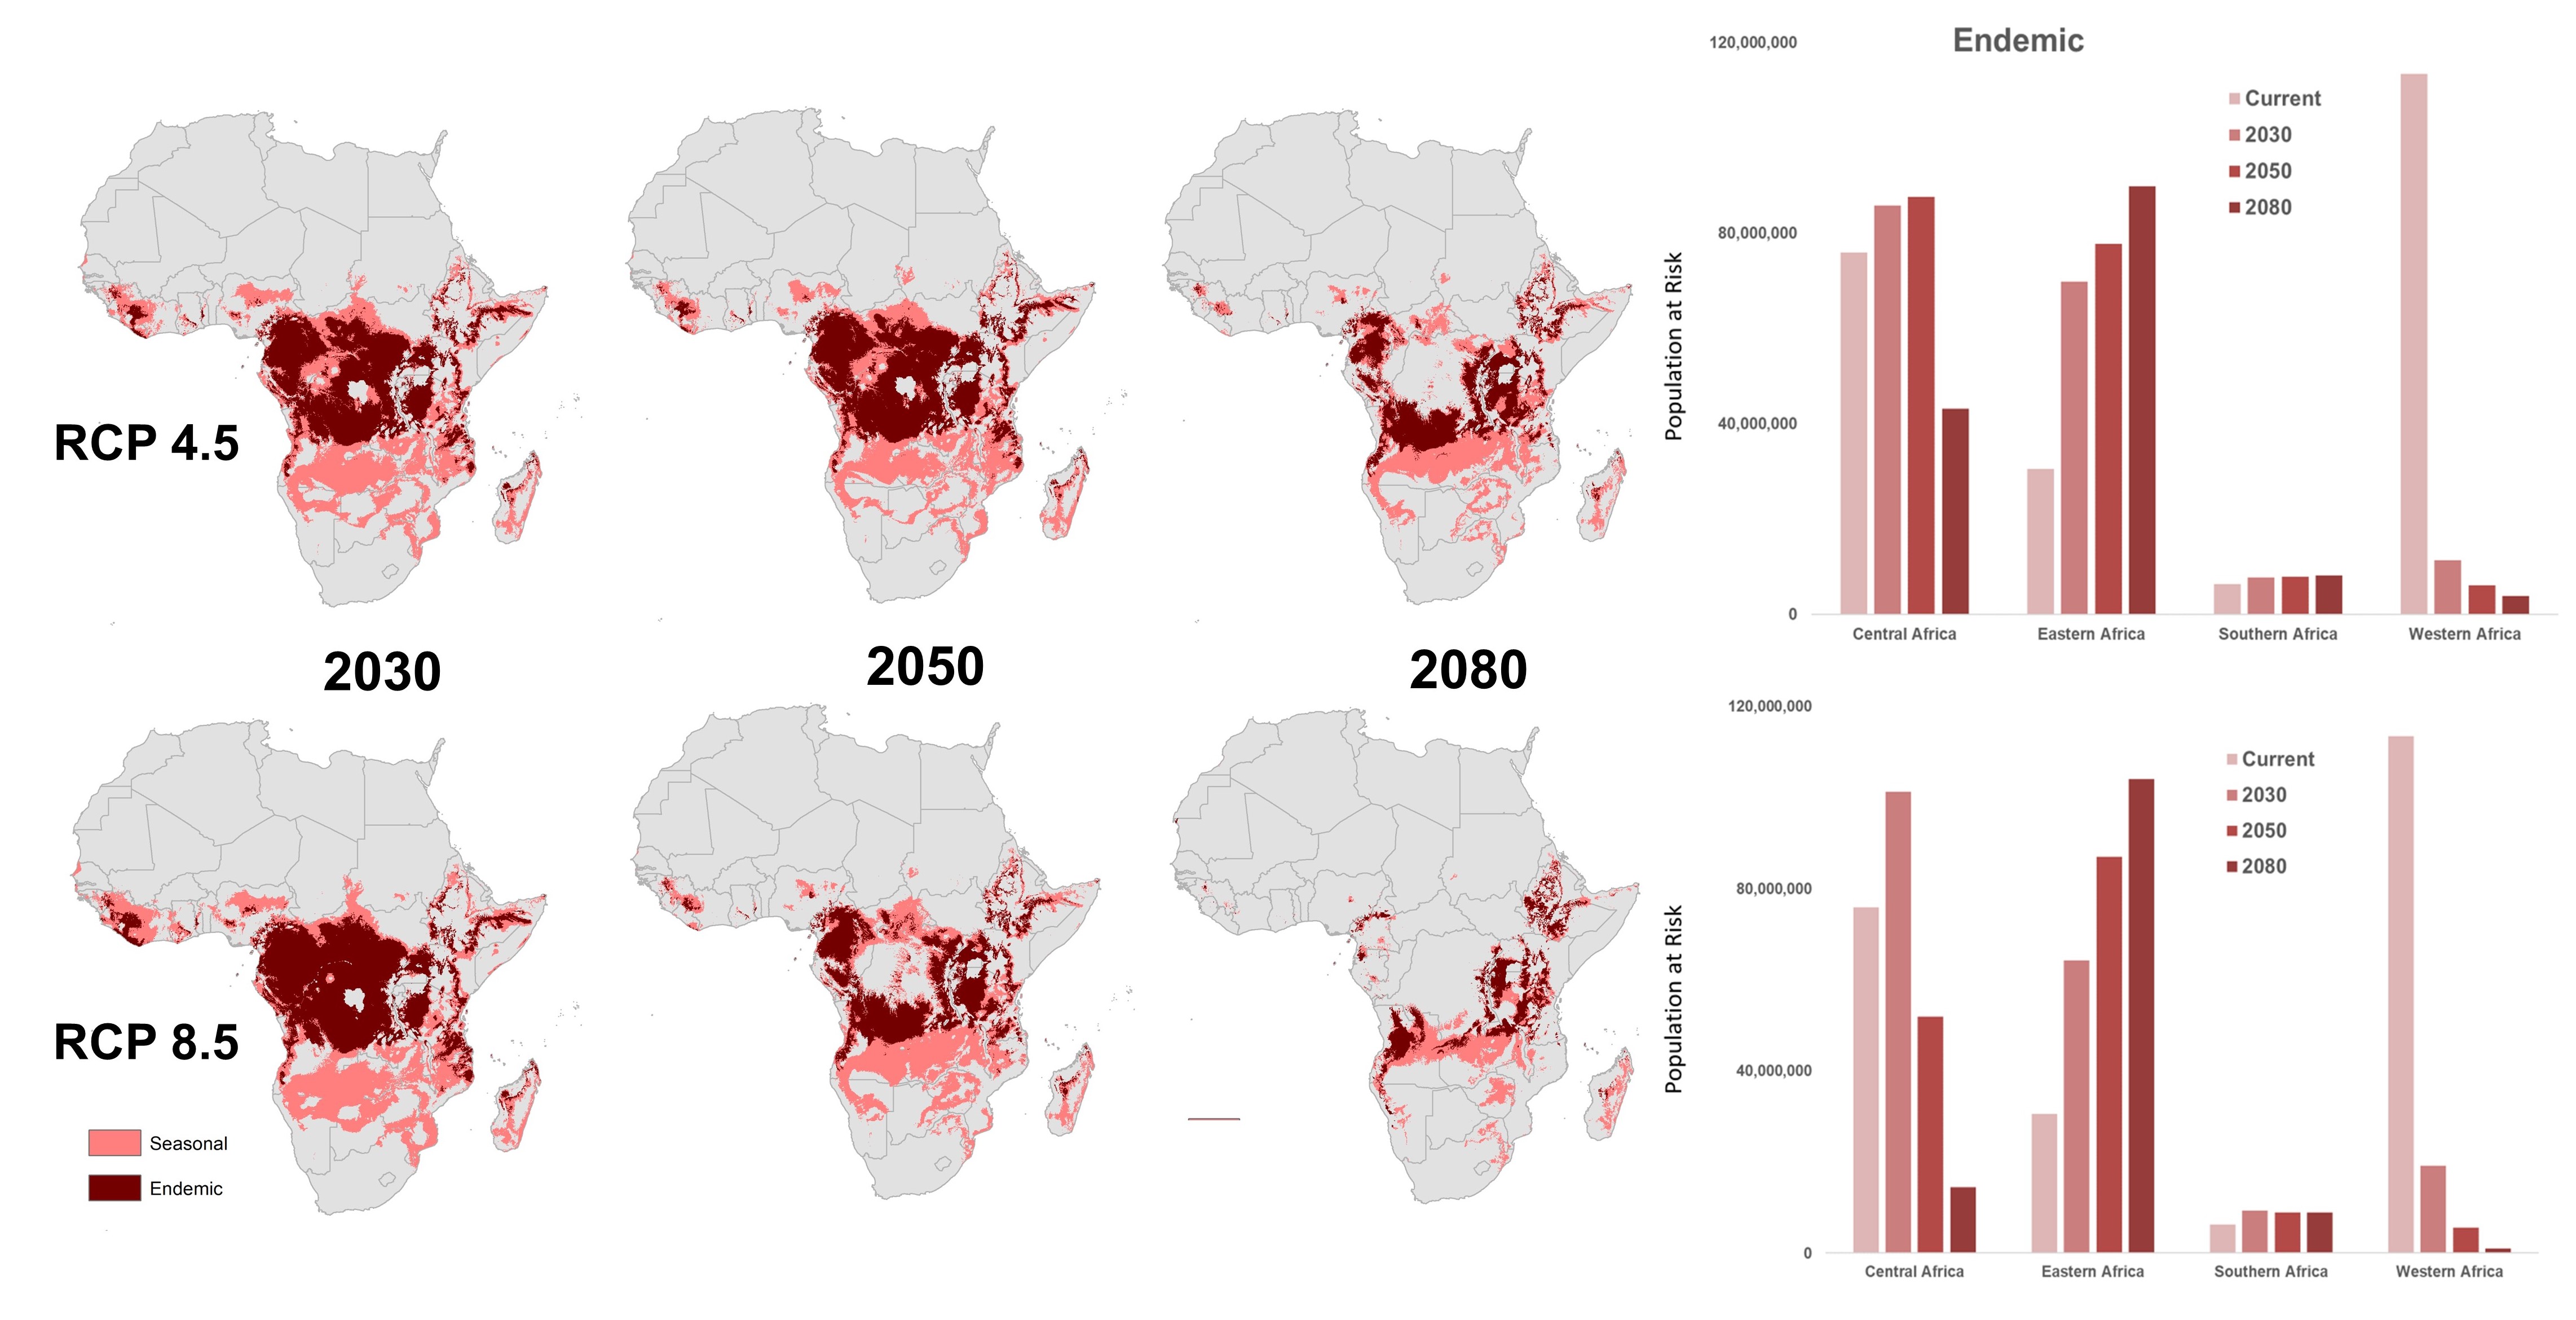 New study shows how malaria risk will shift in Africa under climate